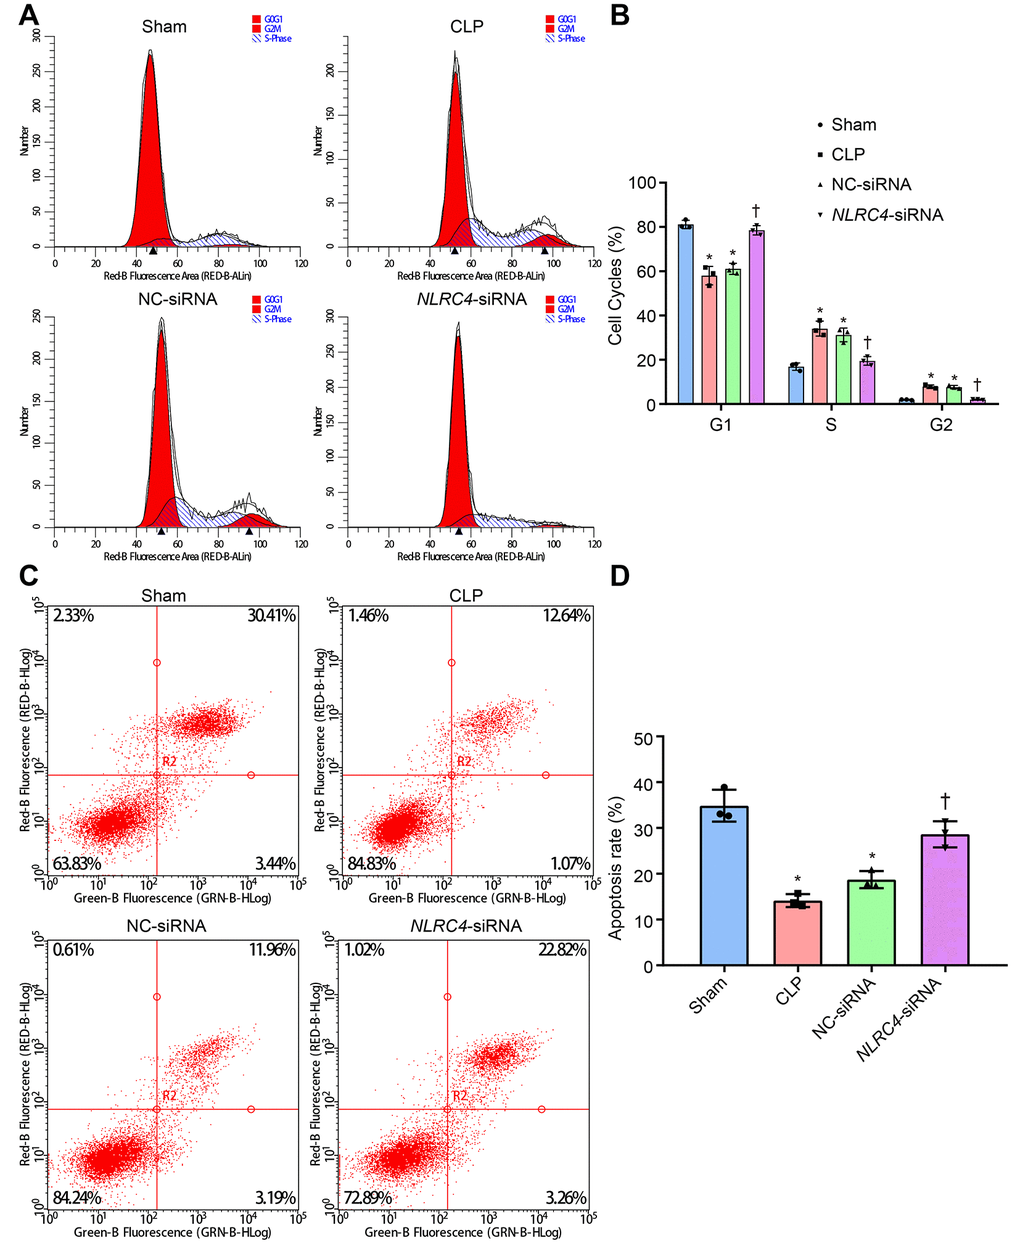 siRNA-mediated silencing of NLRC4 elevates DC cell apoptosis rate in mice with septic shock as evidenced by PI single staining and AnnexinV-FITC/PI double staining. (A, B), DC cycle distribution in the sham, CLP, NC-siRNA, and NLRC4-siRNA groups detected by PI single staining. (C, D) DC apoptosis in the sham, CLP, NC-siRNA, NLRC4-siRNA groups revealed by AnnexinV-FITC/PI double staining. The bone marrow-derived DCs from the same group of mice were adopted in the in vivo experiments. * p p 